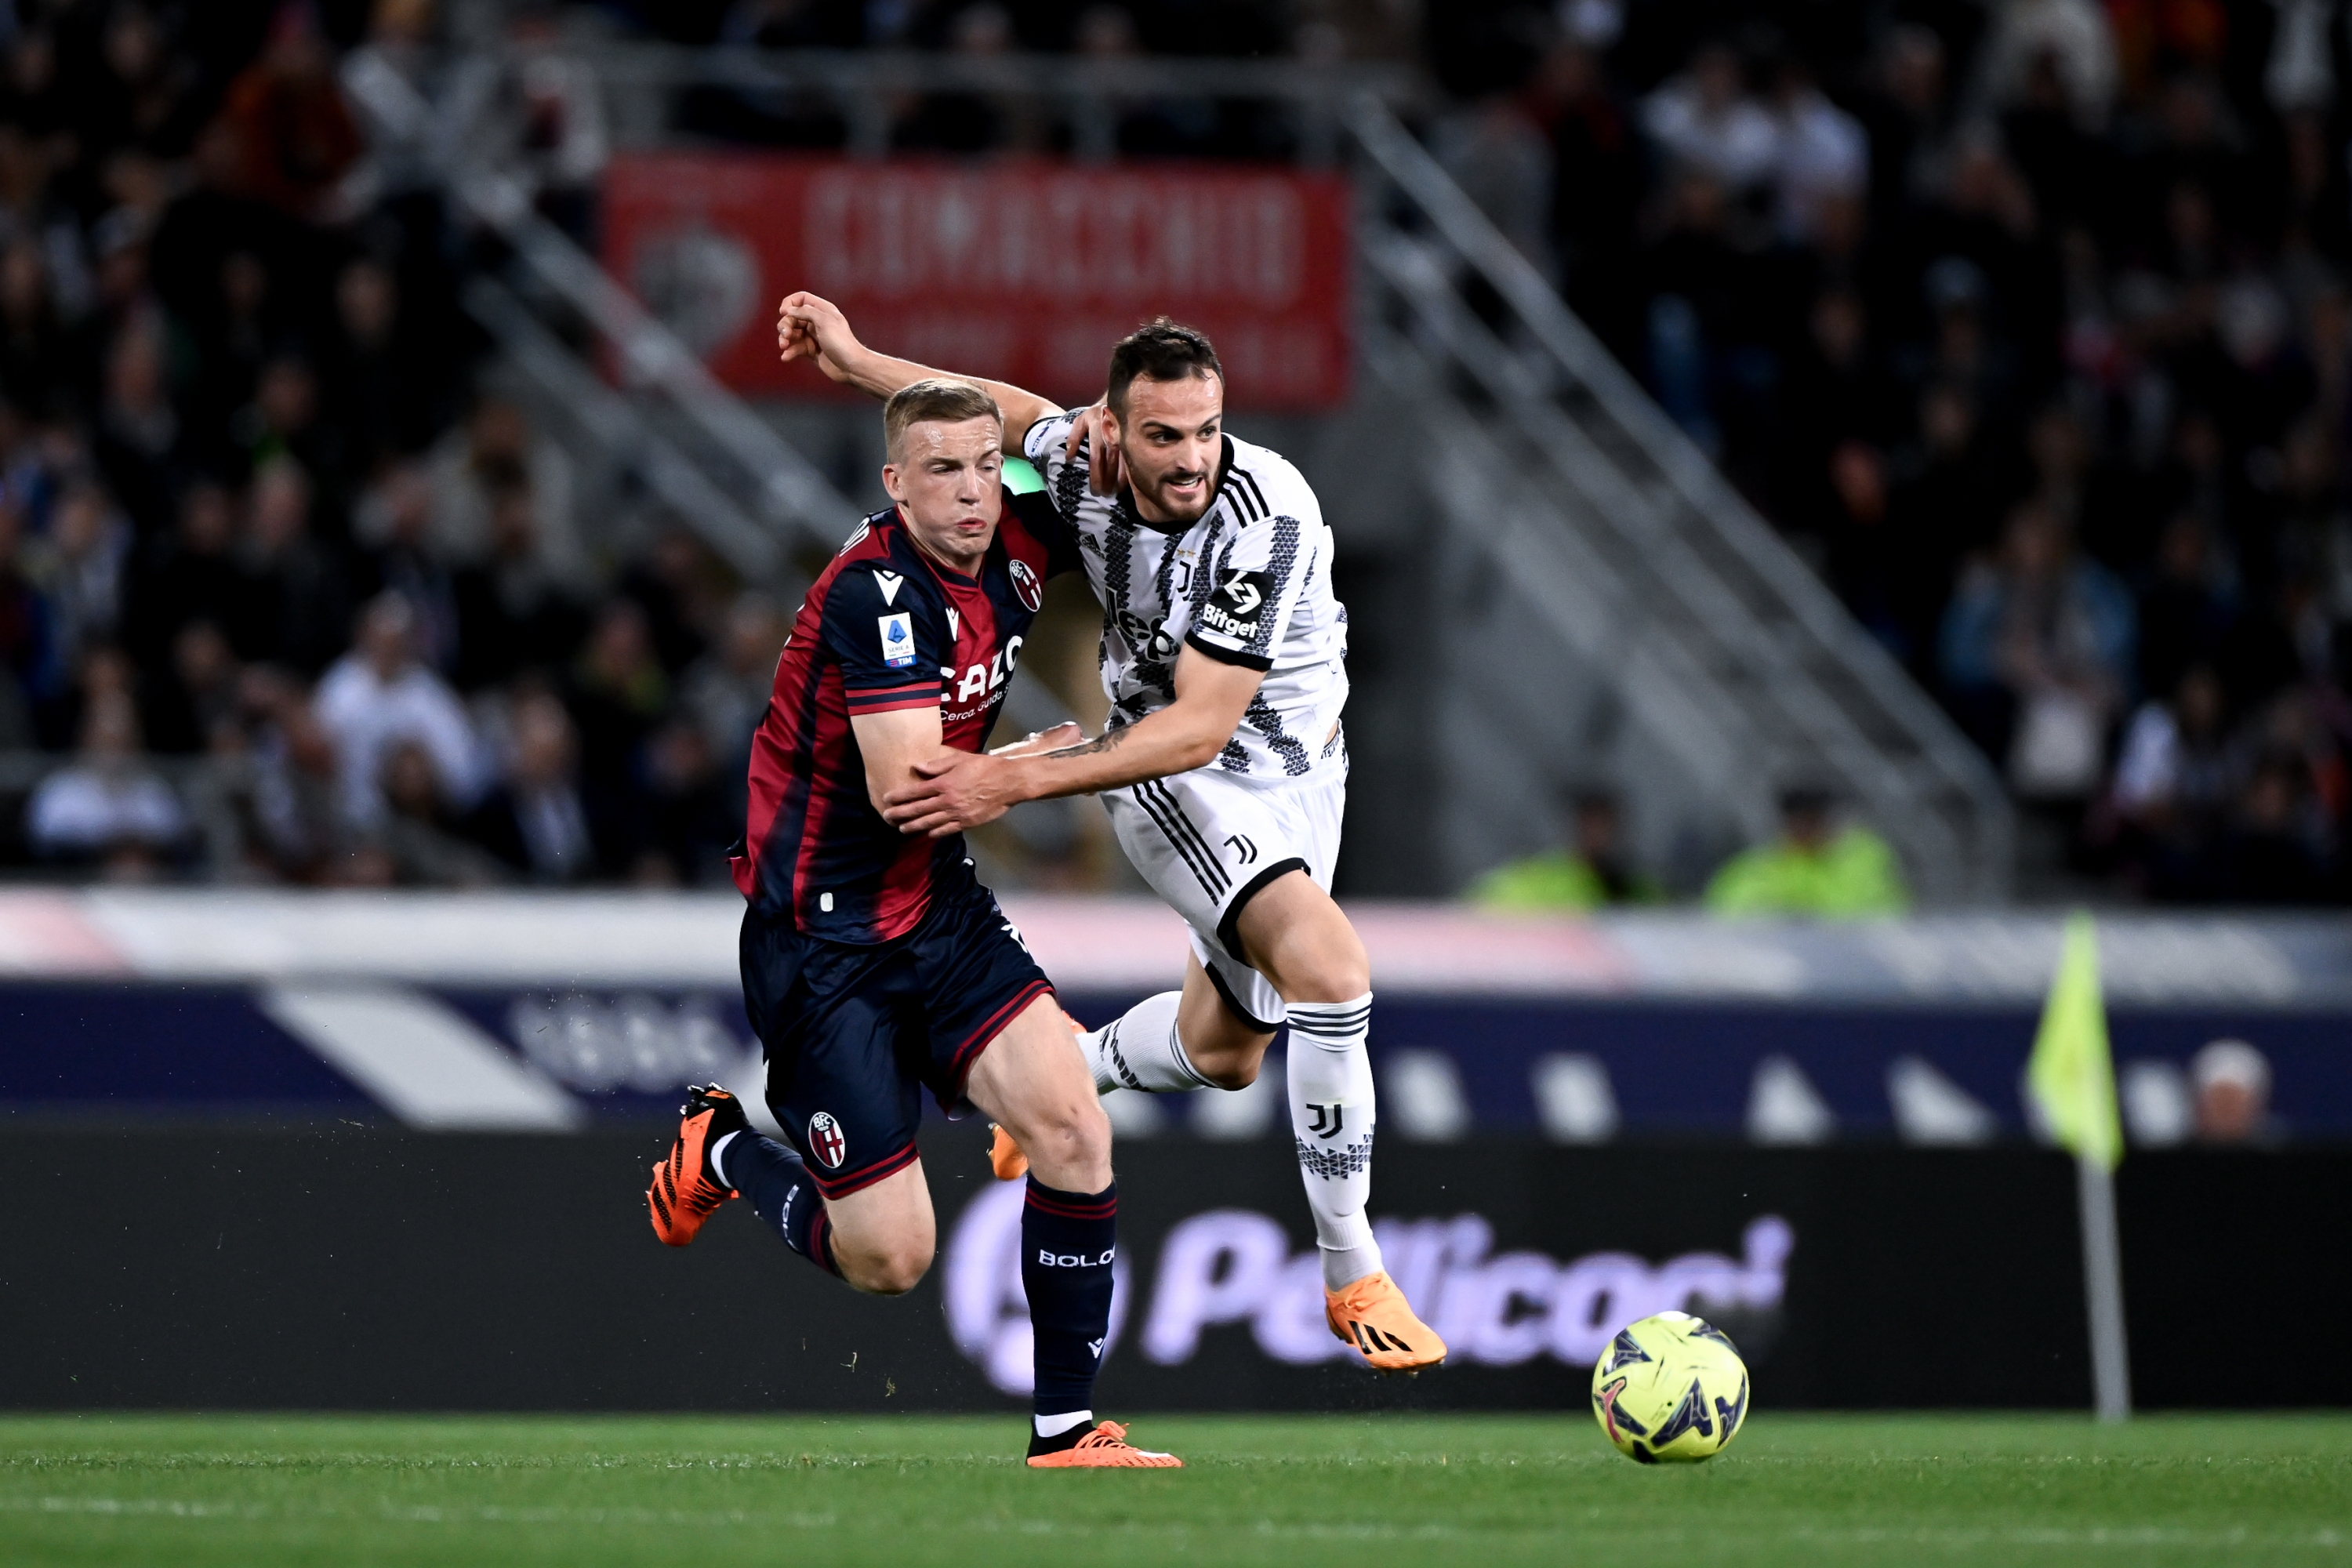 BOLOGNA, ITALY - APRIL 30: Federico Gatti of Juventus battles for the ball with Lewis Ferguson of Bologna FC during the Serie A match between Bologna FC and Juventus at Stadio Renato Dall'Ara on April 30, 2023 in Bologna, Italy. (Photo by Daniele Badolato - Juventus FC/Juventus FC via Getty Images)